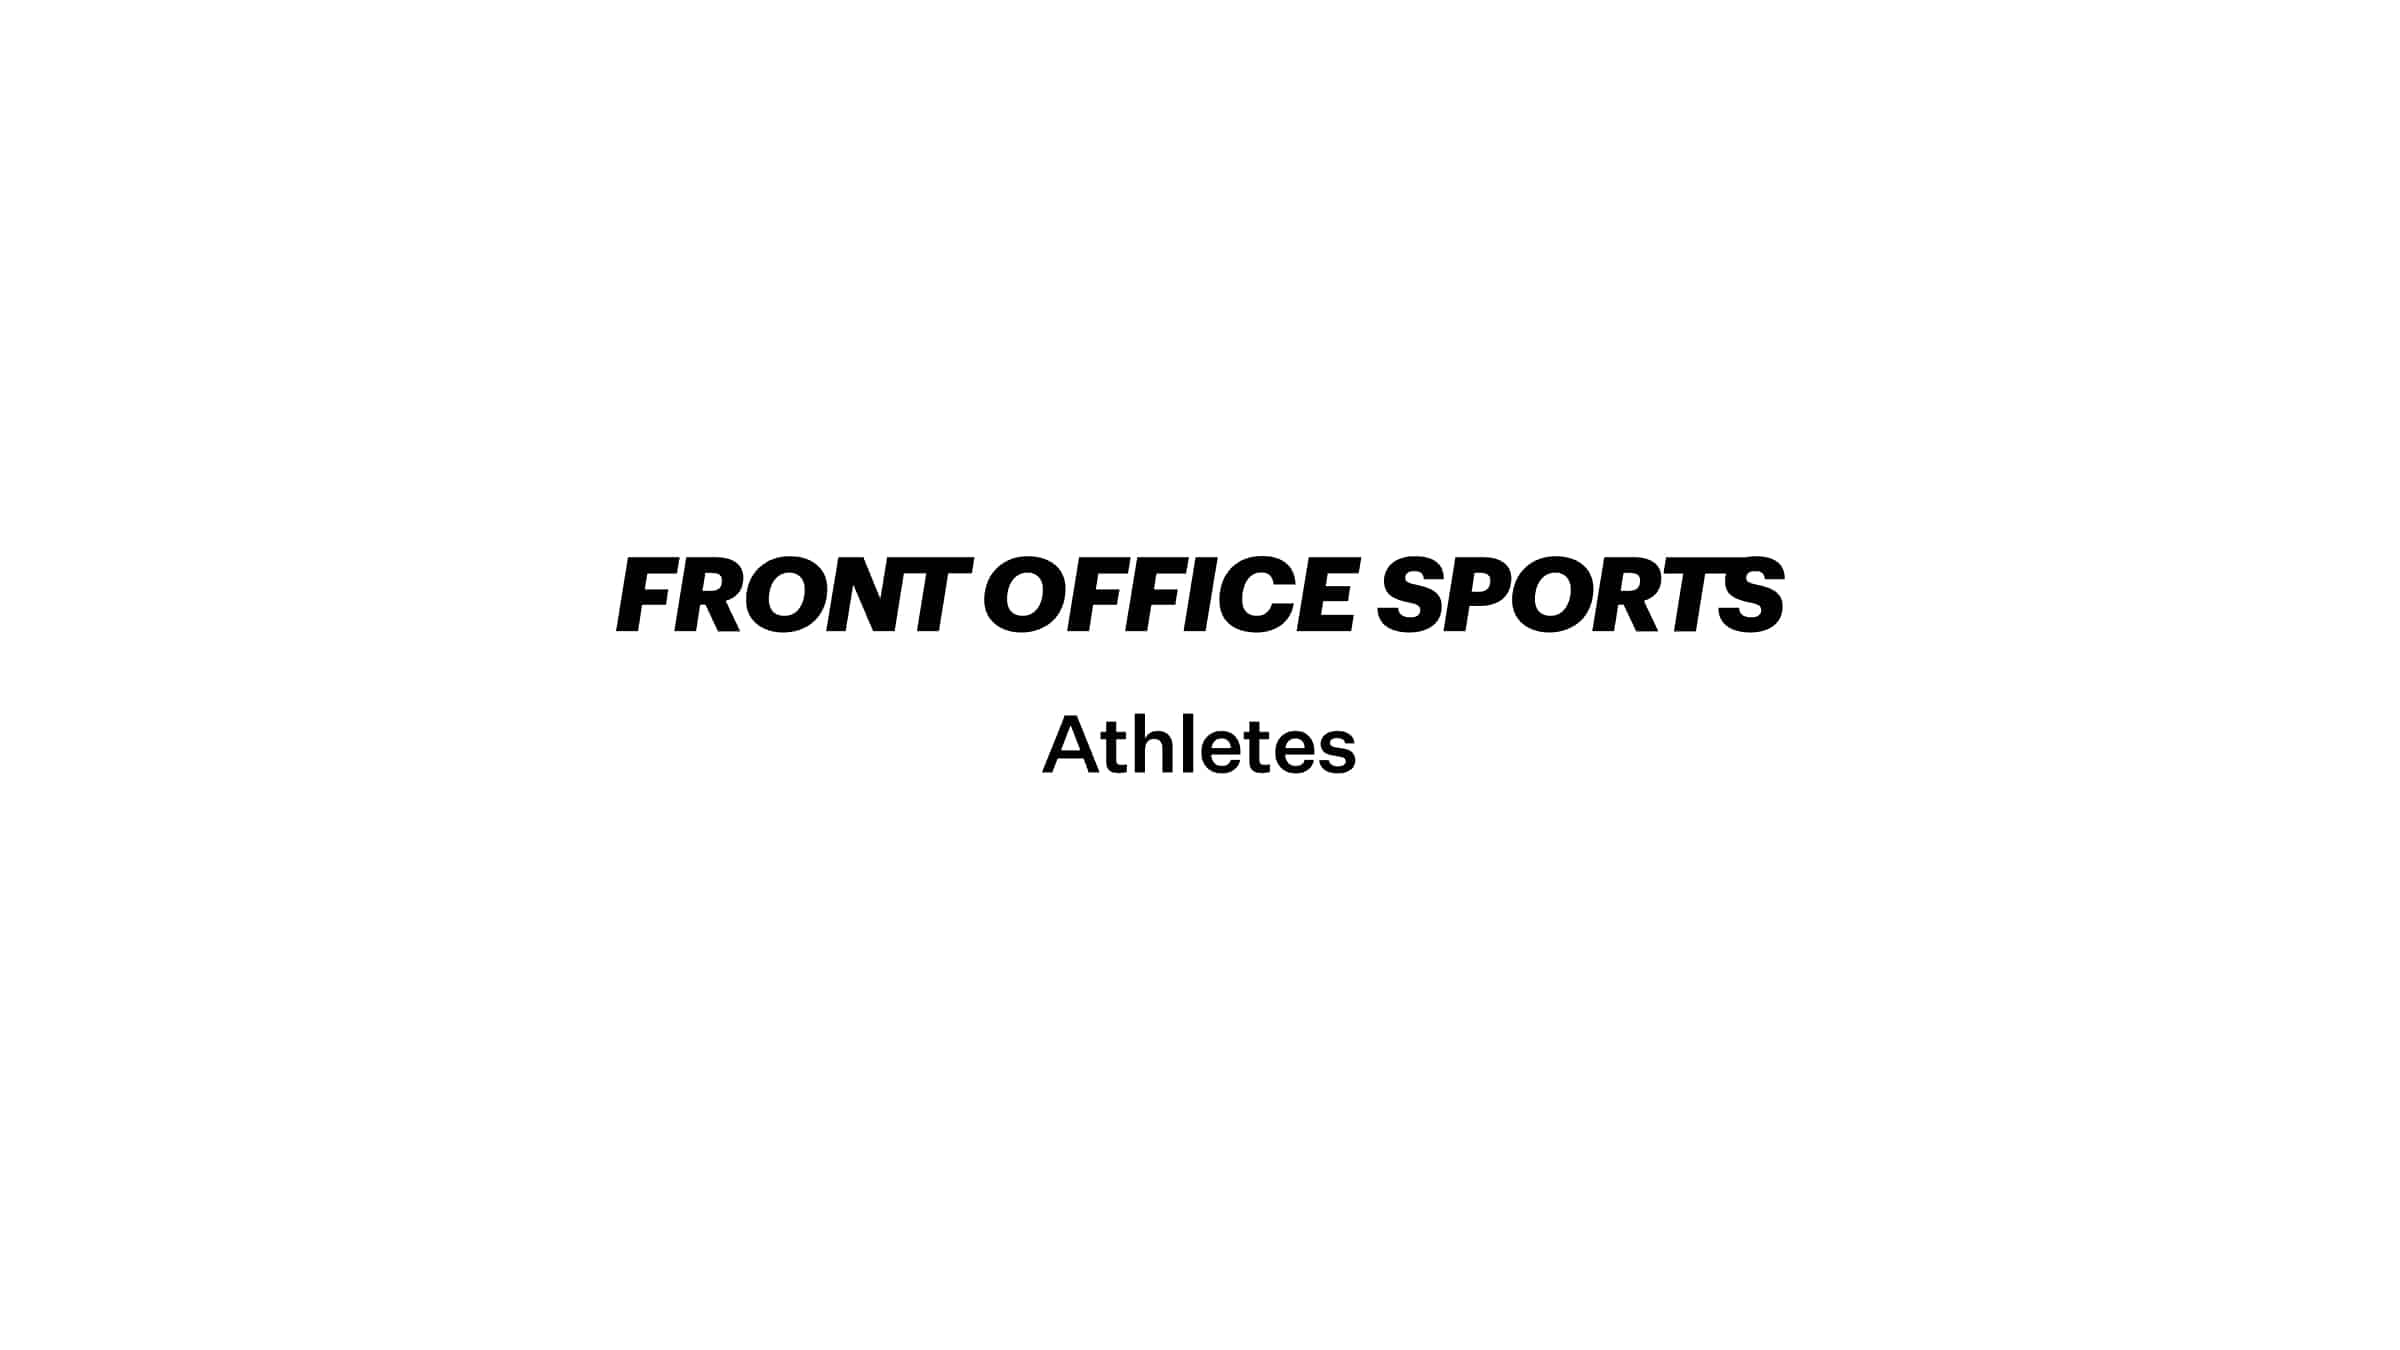 athletes-archives-page-2-of-88-front-office-sports